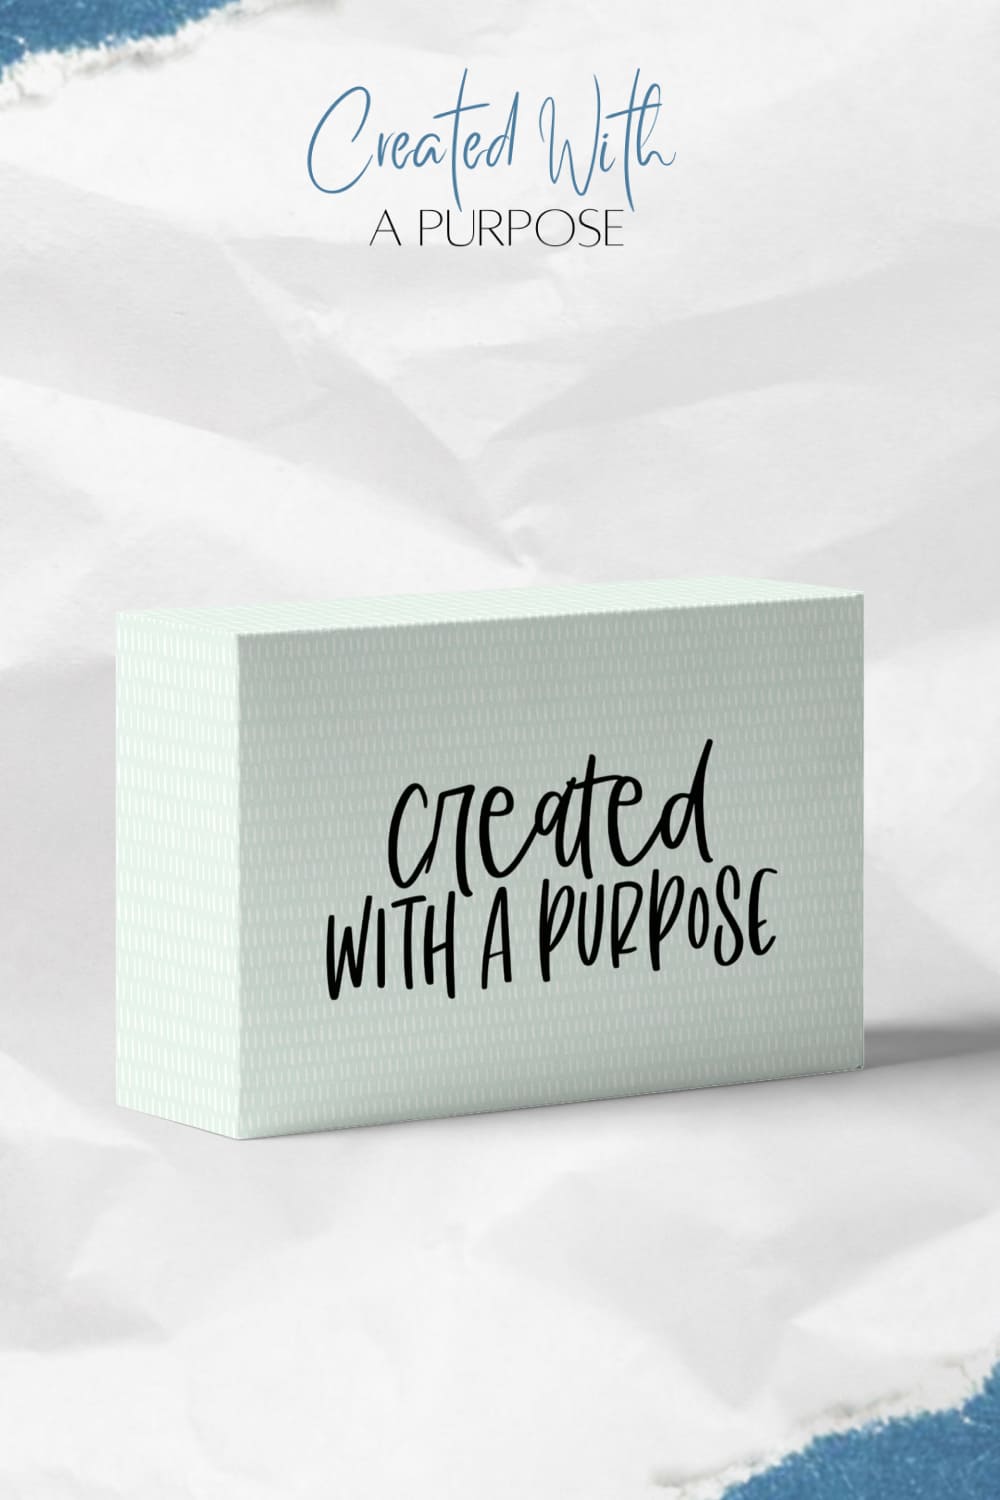 The cardboard box is marked "Created with a Purpose".